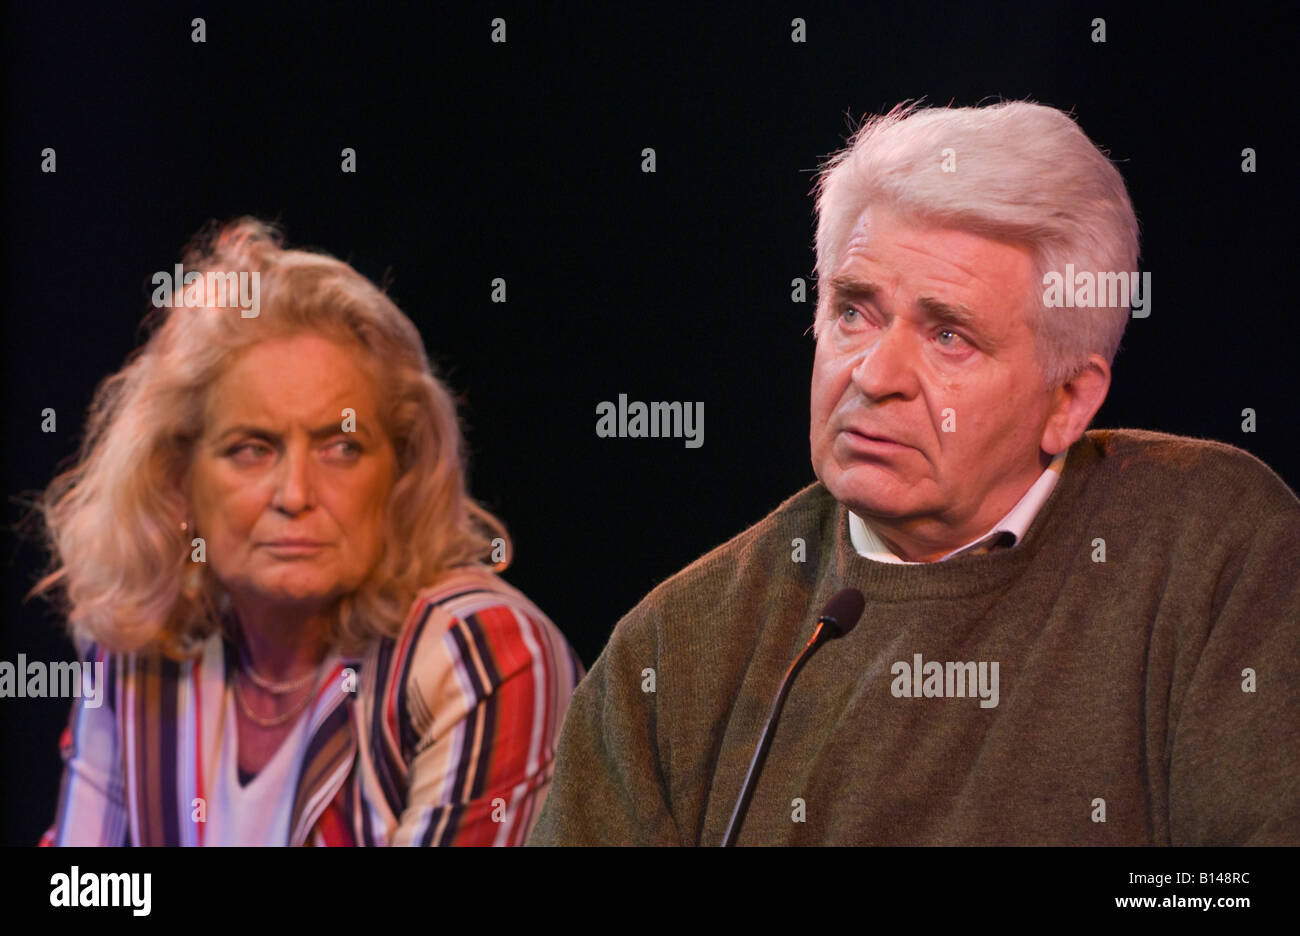 Boris Spassky Russian chess grandmaster talking about his life on stage at  Hay Festival 2008 Hay on Wye Powys Wales UK Stock Photo - Alamy